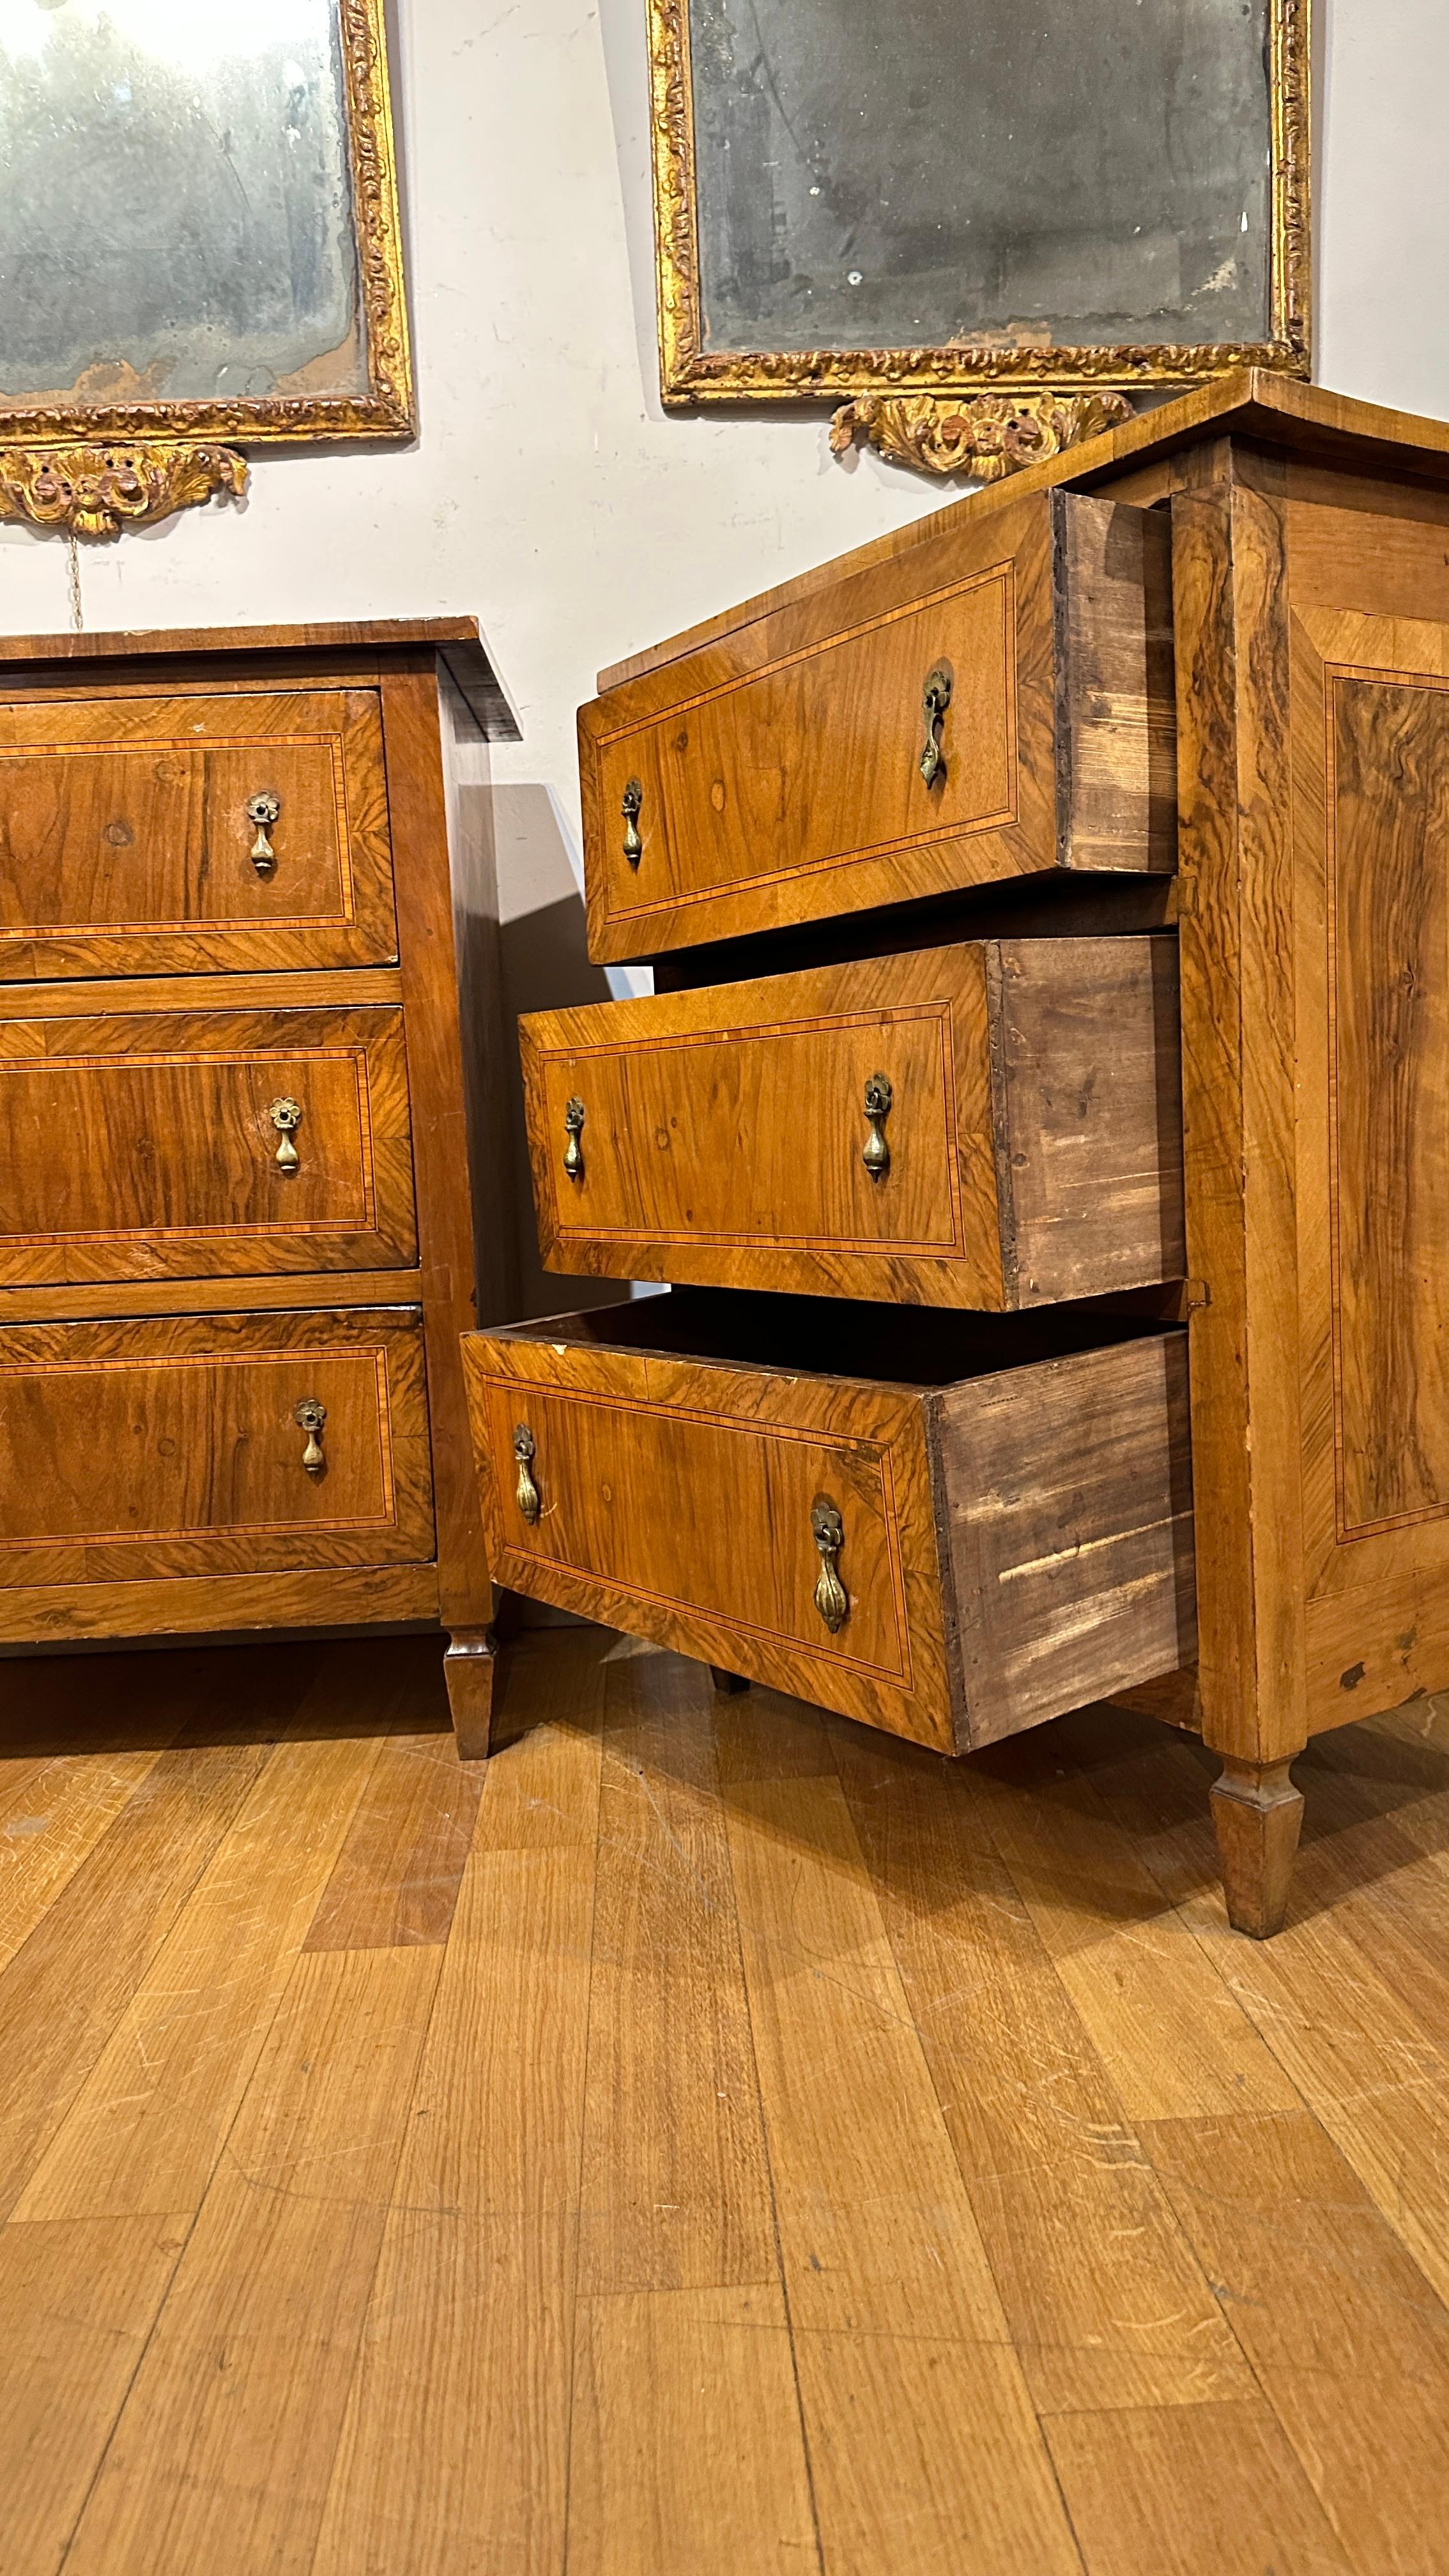 END OF THE 18th CENTURY VENETIAN SMALL-DRAWERS 2